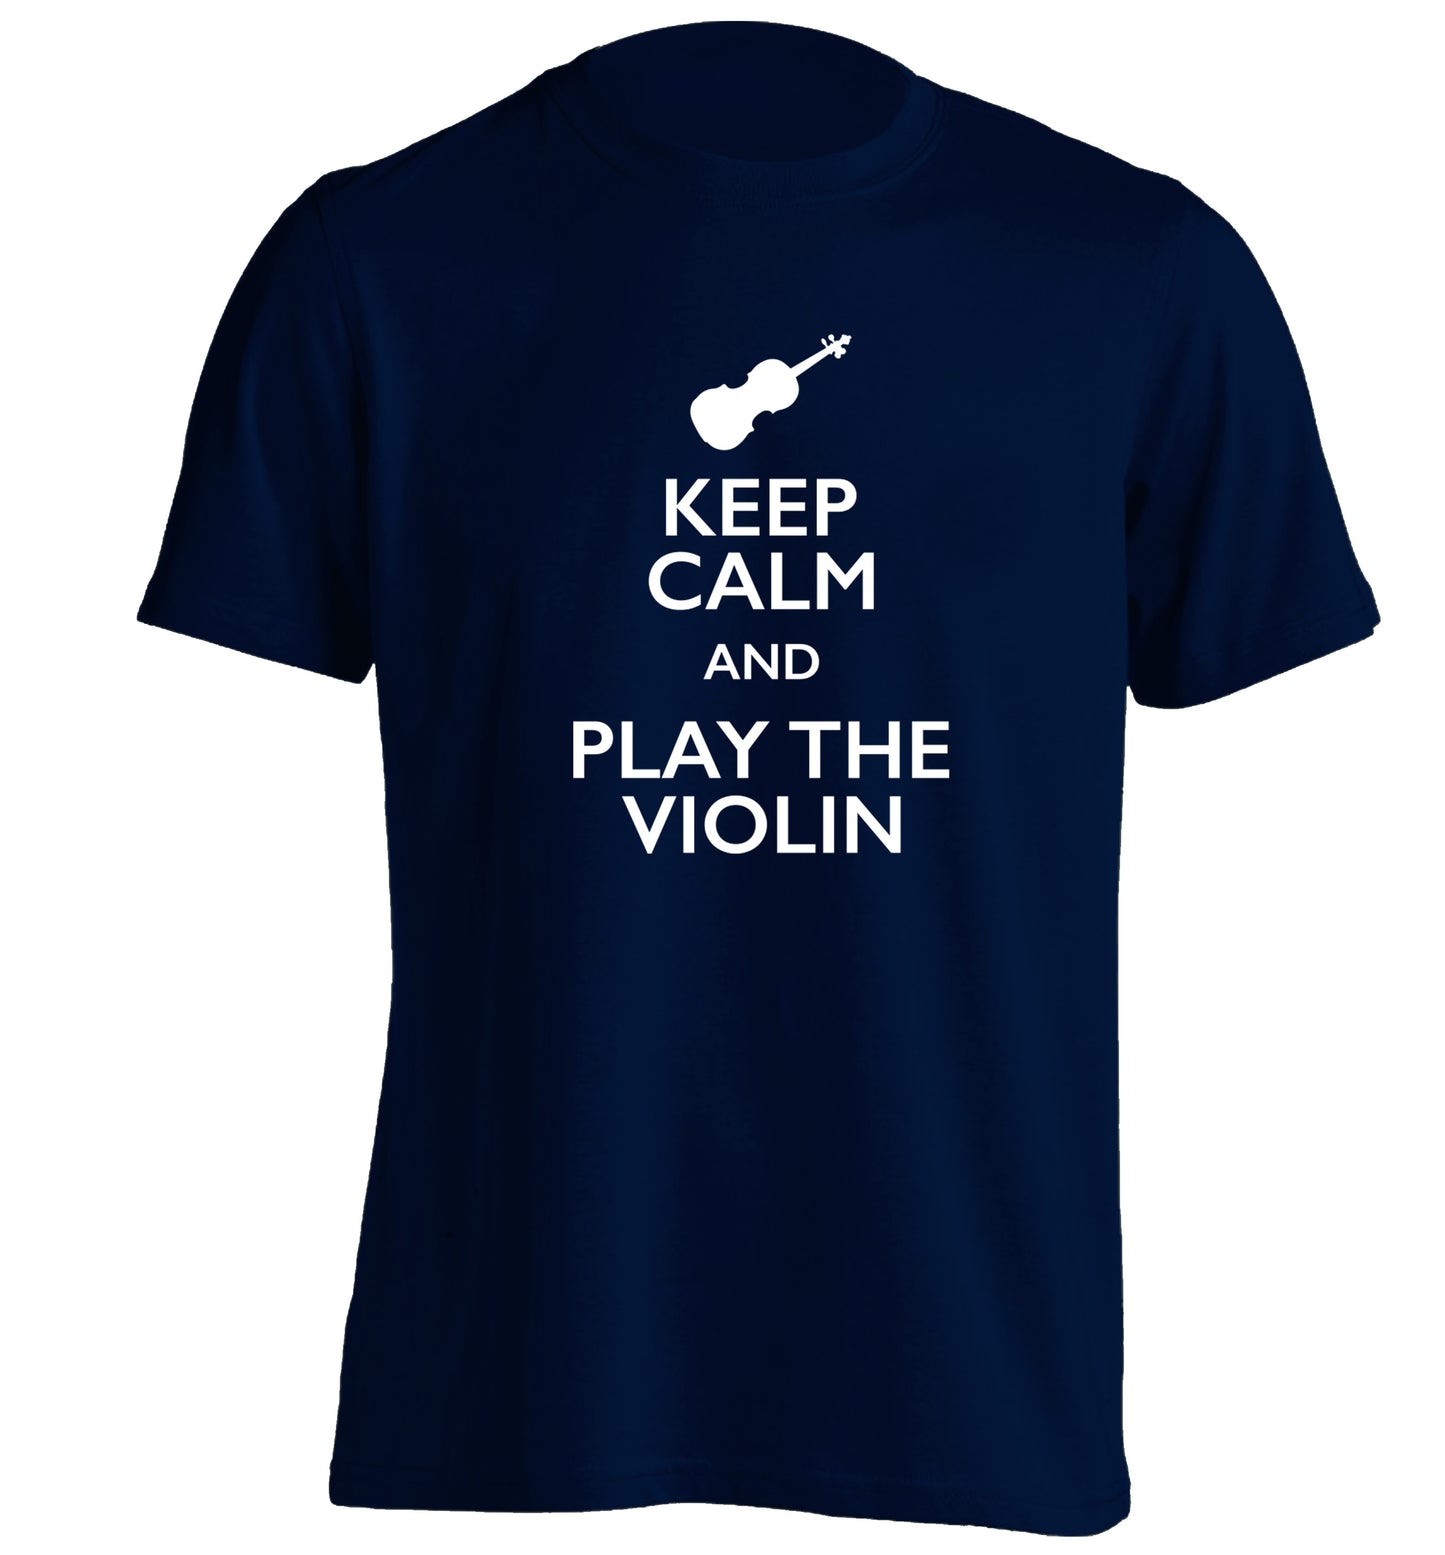 Keep calm and play the violin adults unisex navy Tshirt 2XL